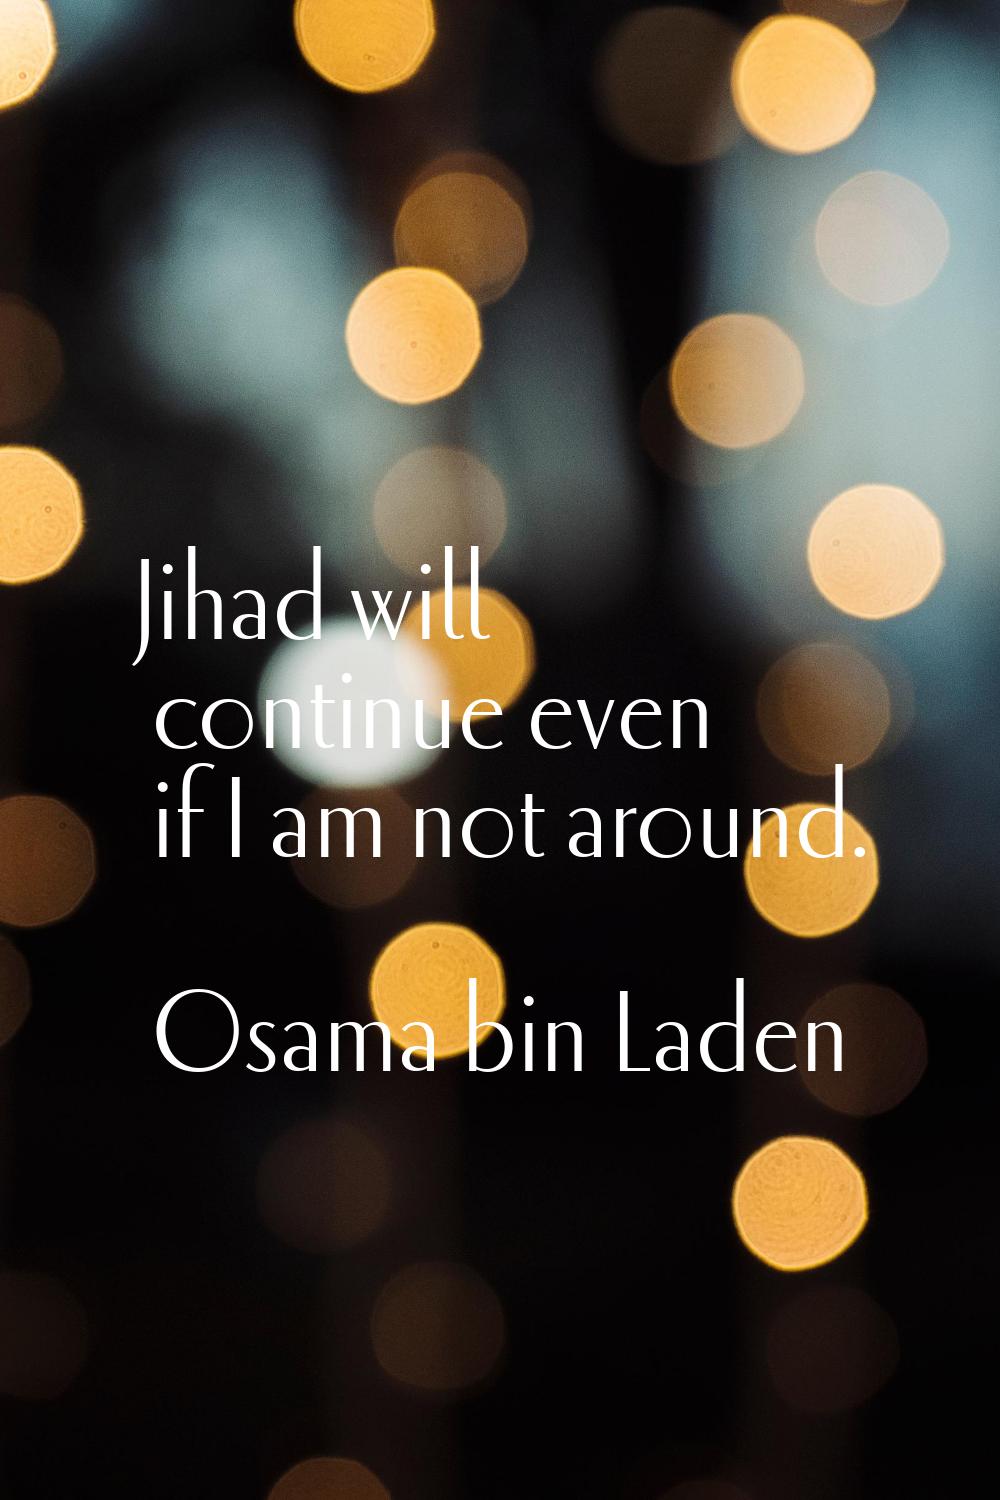 Jihad will continue even if I am not around.